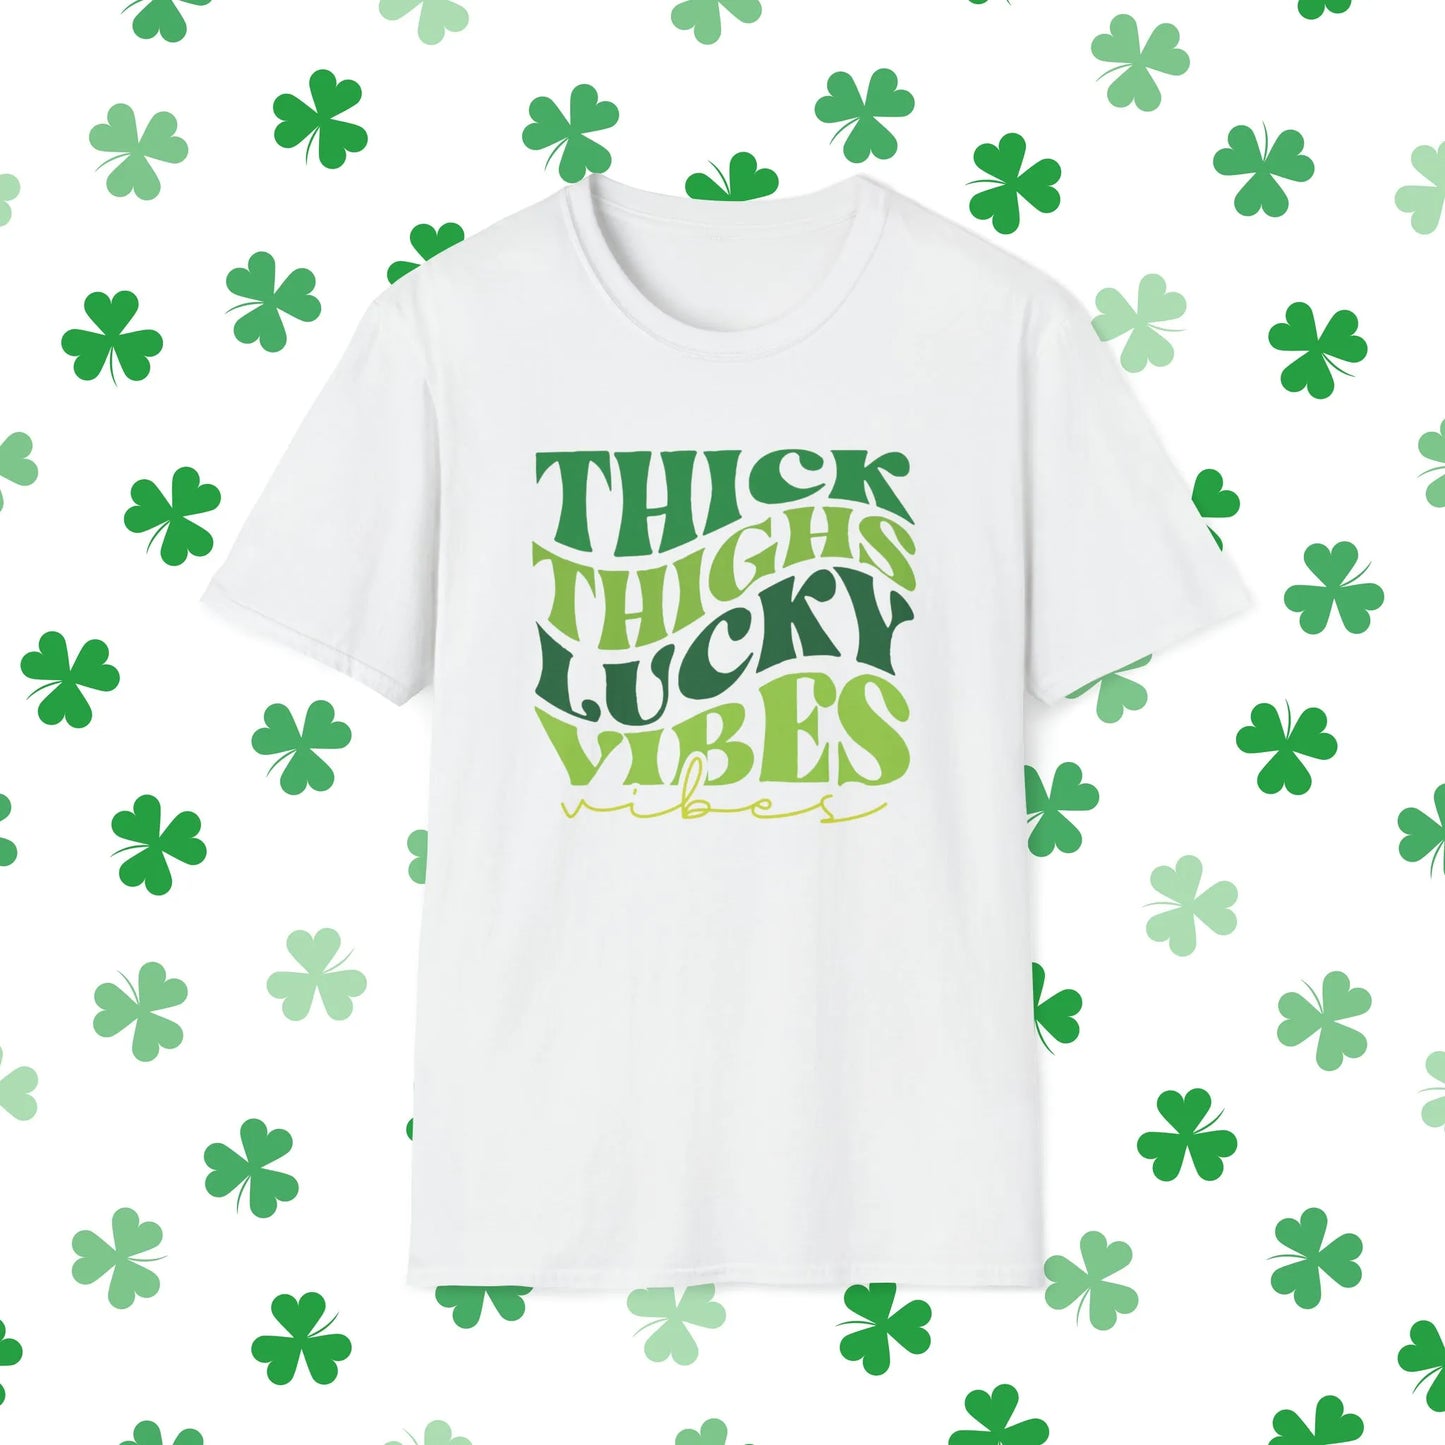 Thick Thighs Lucky Vibes Retro-Style St. Patrick's Day T-Shirt - Comfort & Charm - Thick Thighs Lucky Vibes St. Patrick's Day Shirt White